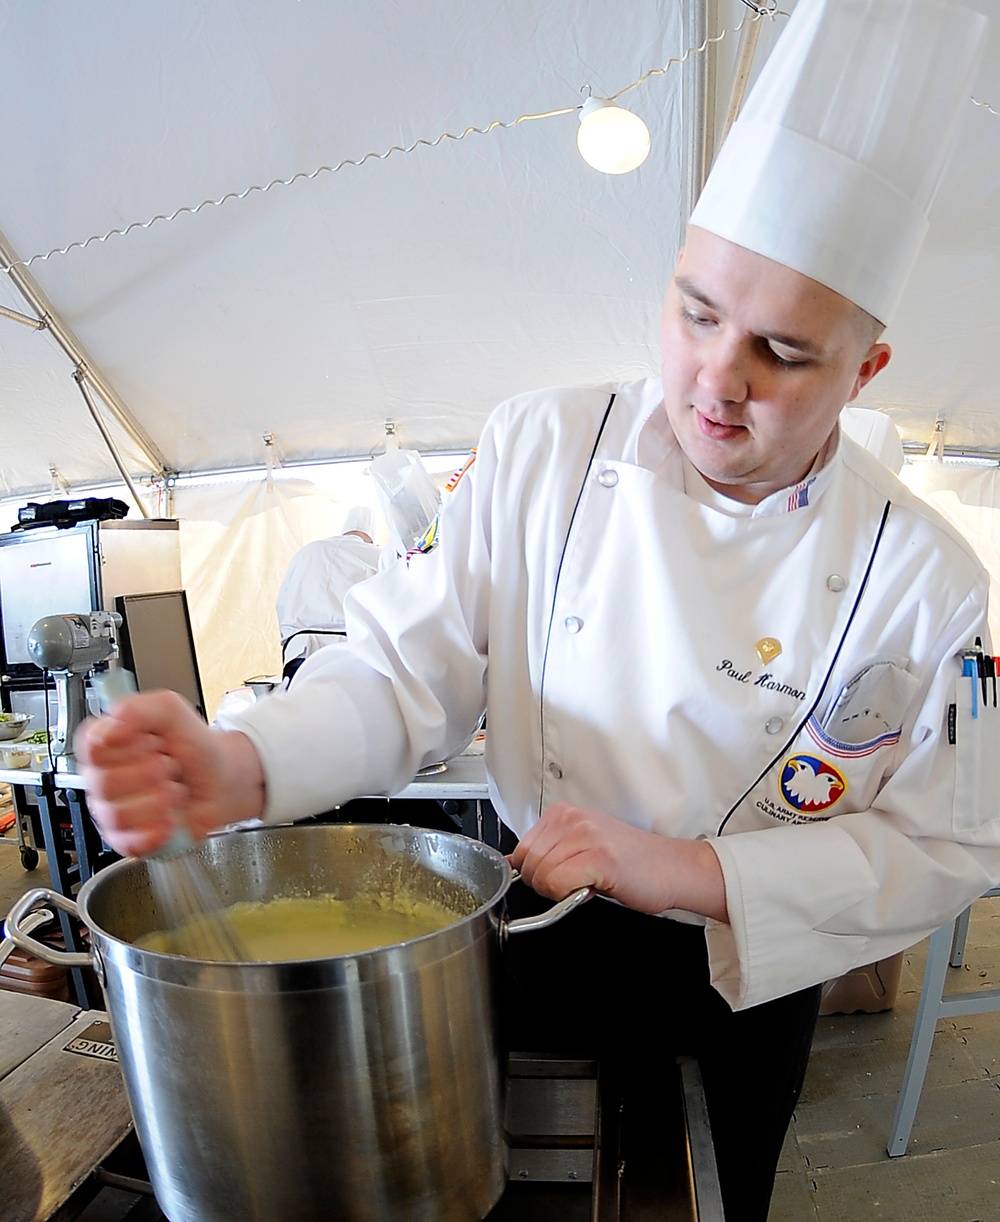 Army Reserve competes in Field Kitchen category at Army Culinary Arts Competition